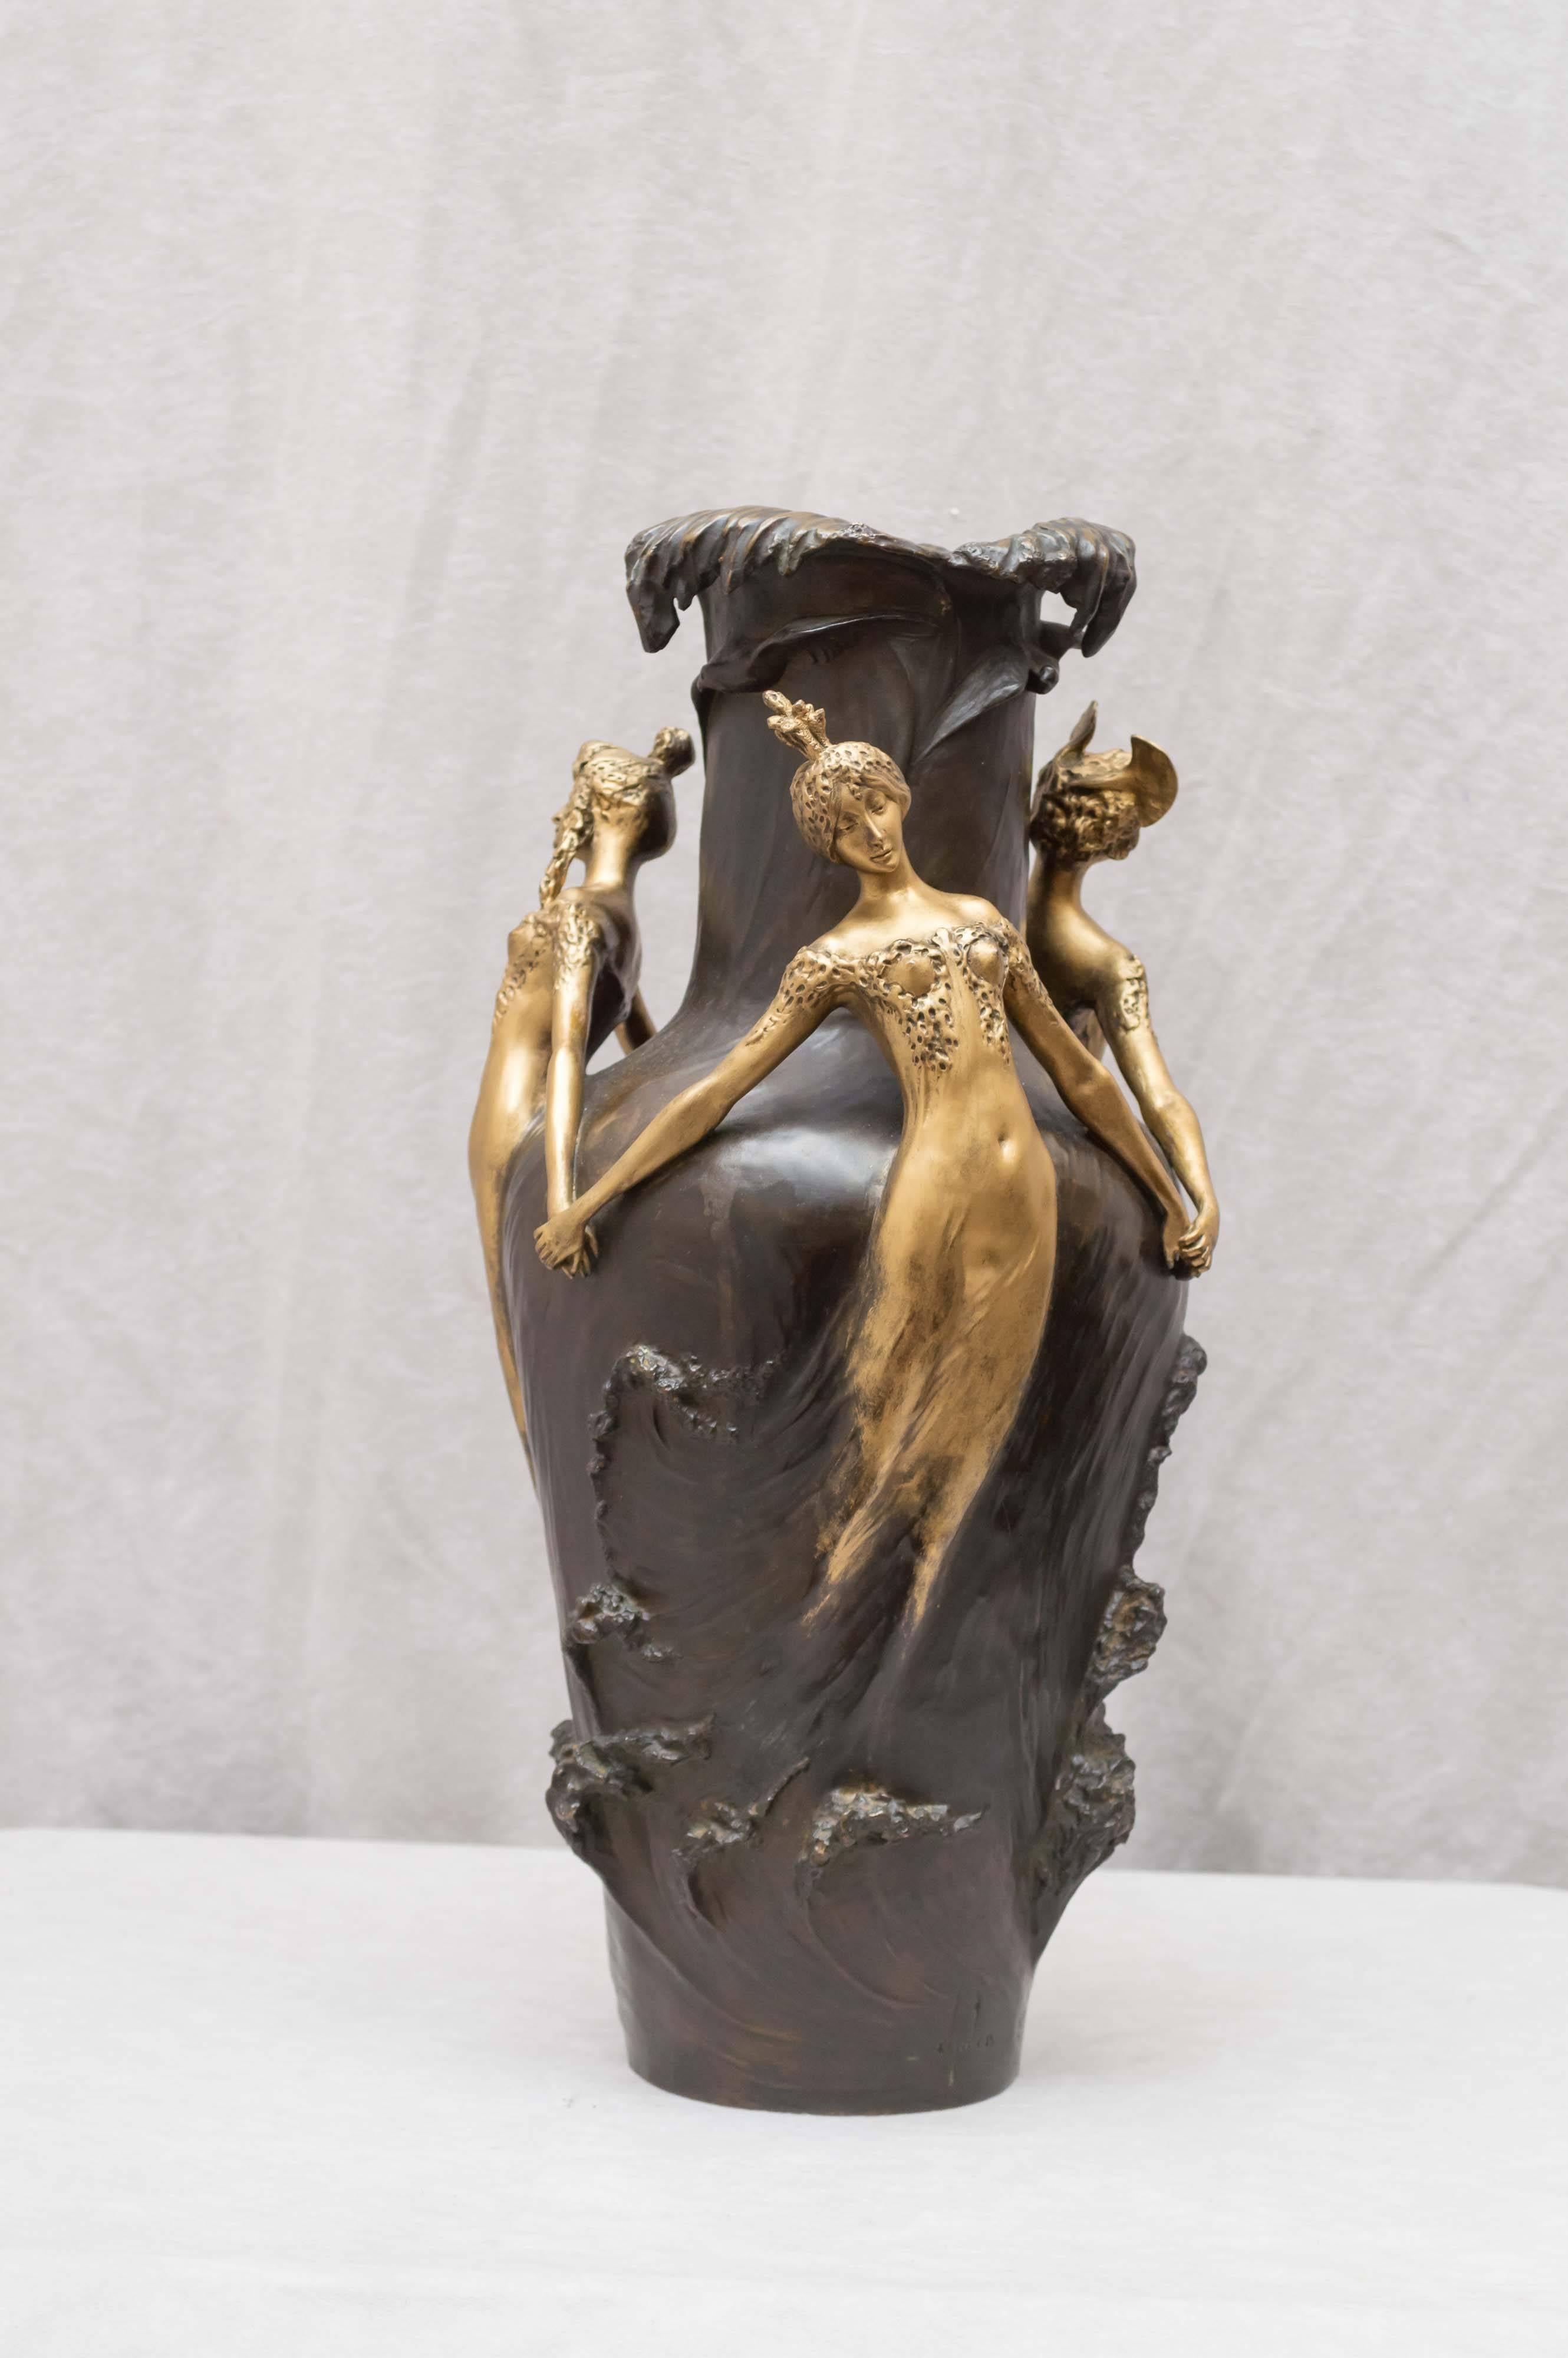 This truly magnificent bronze vase (Les Fillesdes vagues) is one of the more important Art Nouveau bronzes produced by this well regarded artist of his time.
 Louis Chalon was born in Paris in 1866 and he exhibited at the Salon between 1898 and